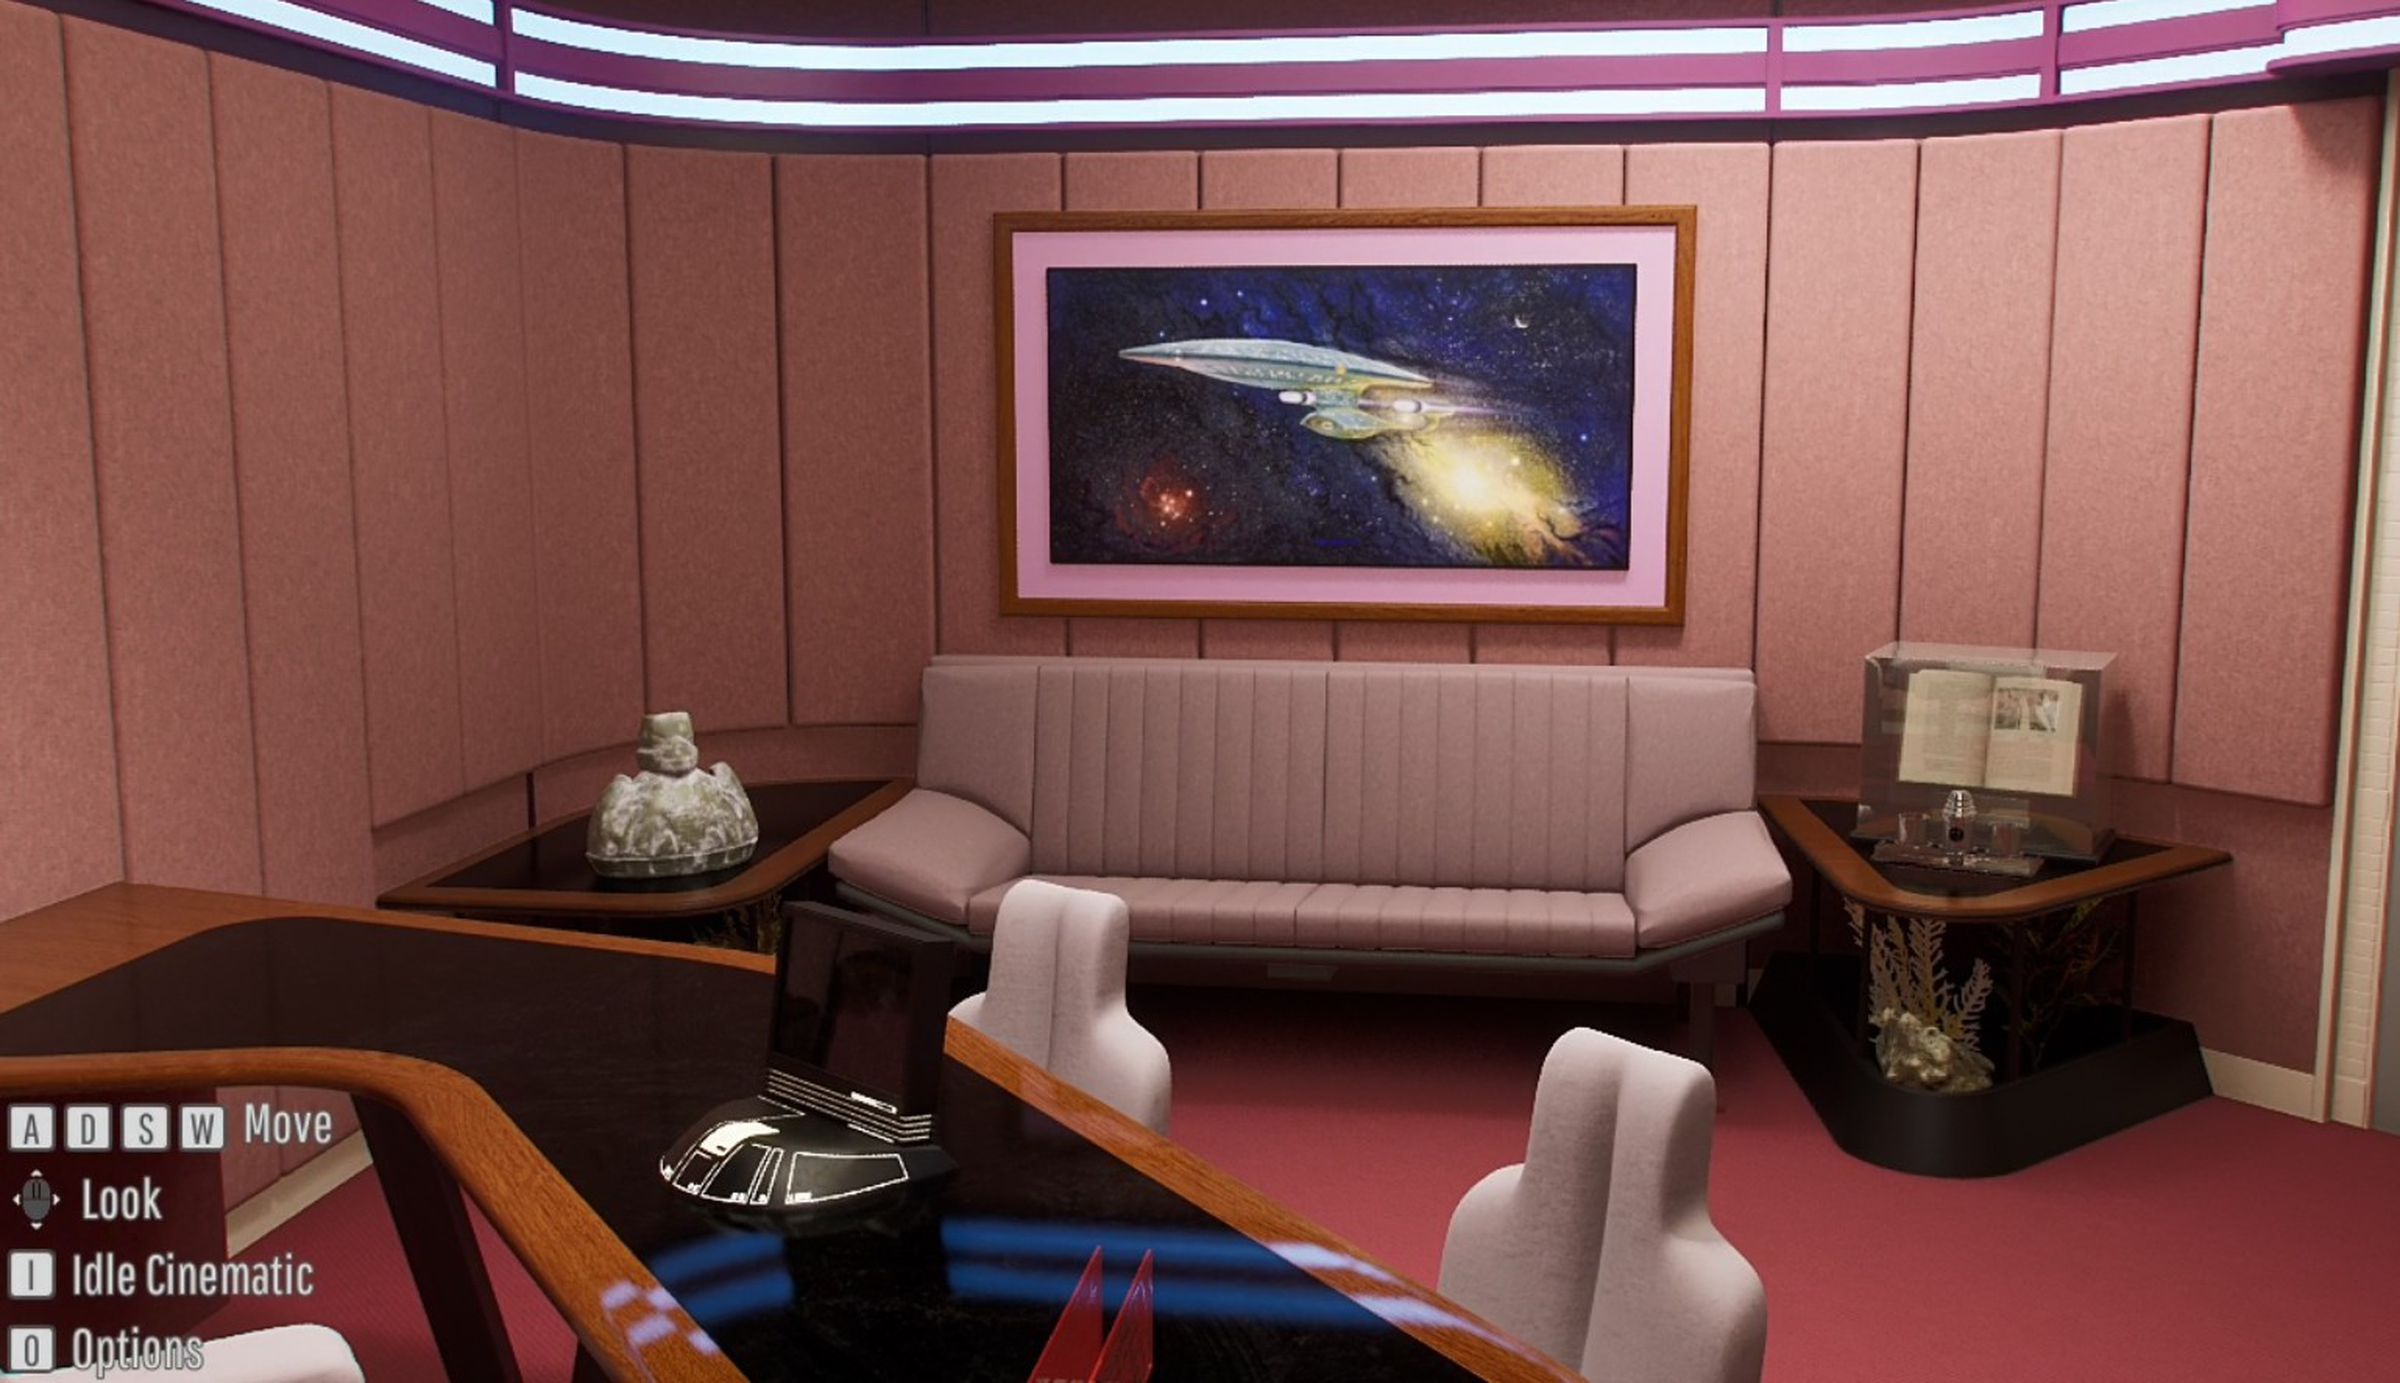 Visit Picard’s office.